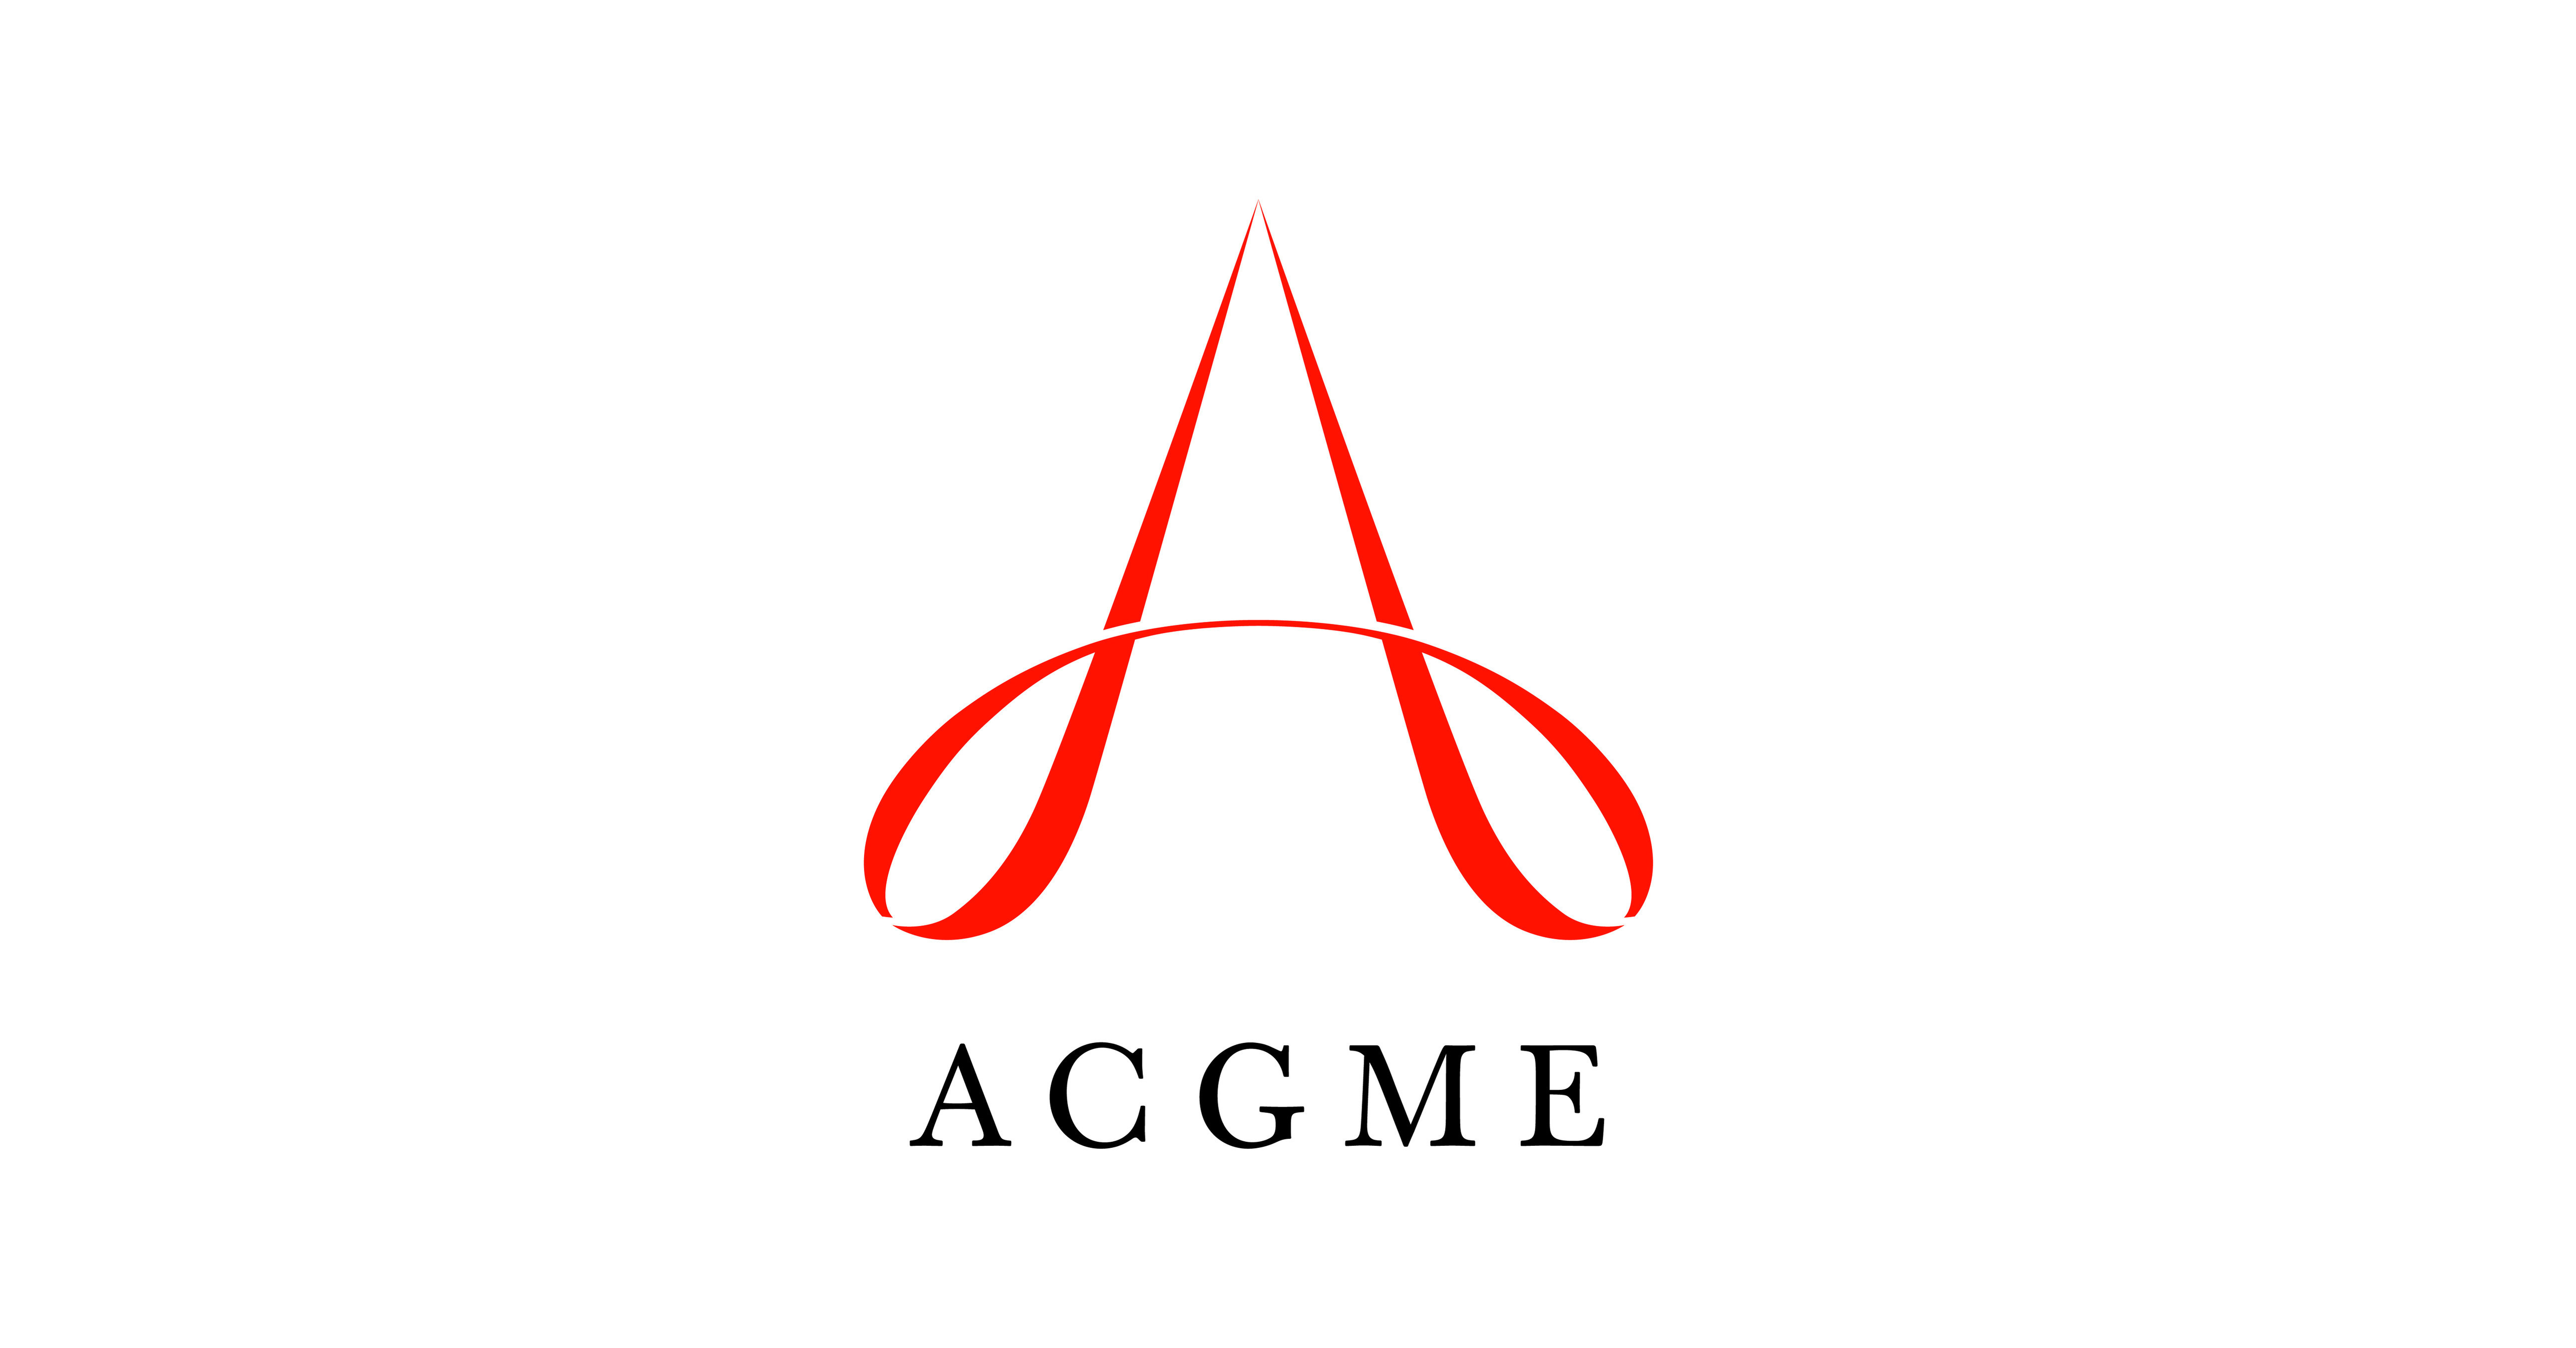 ACGME Names Lynne Kirk, MD, MACP First Chief Accreditation Officer